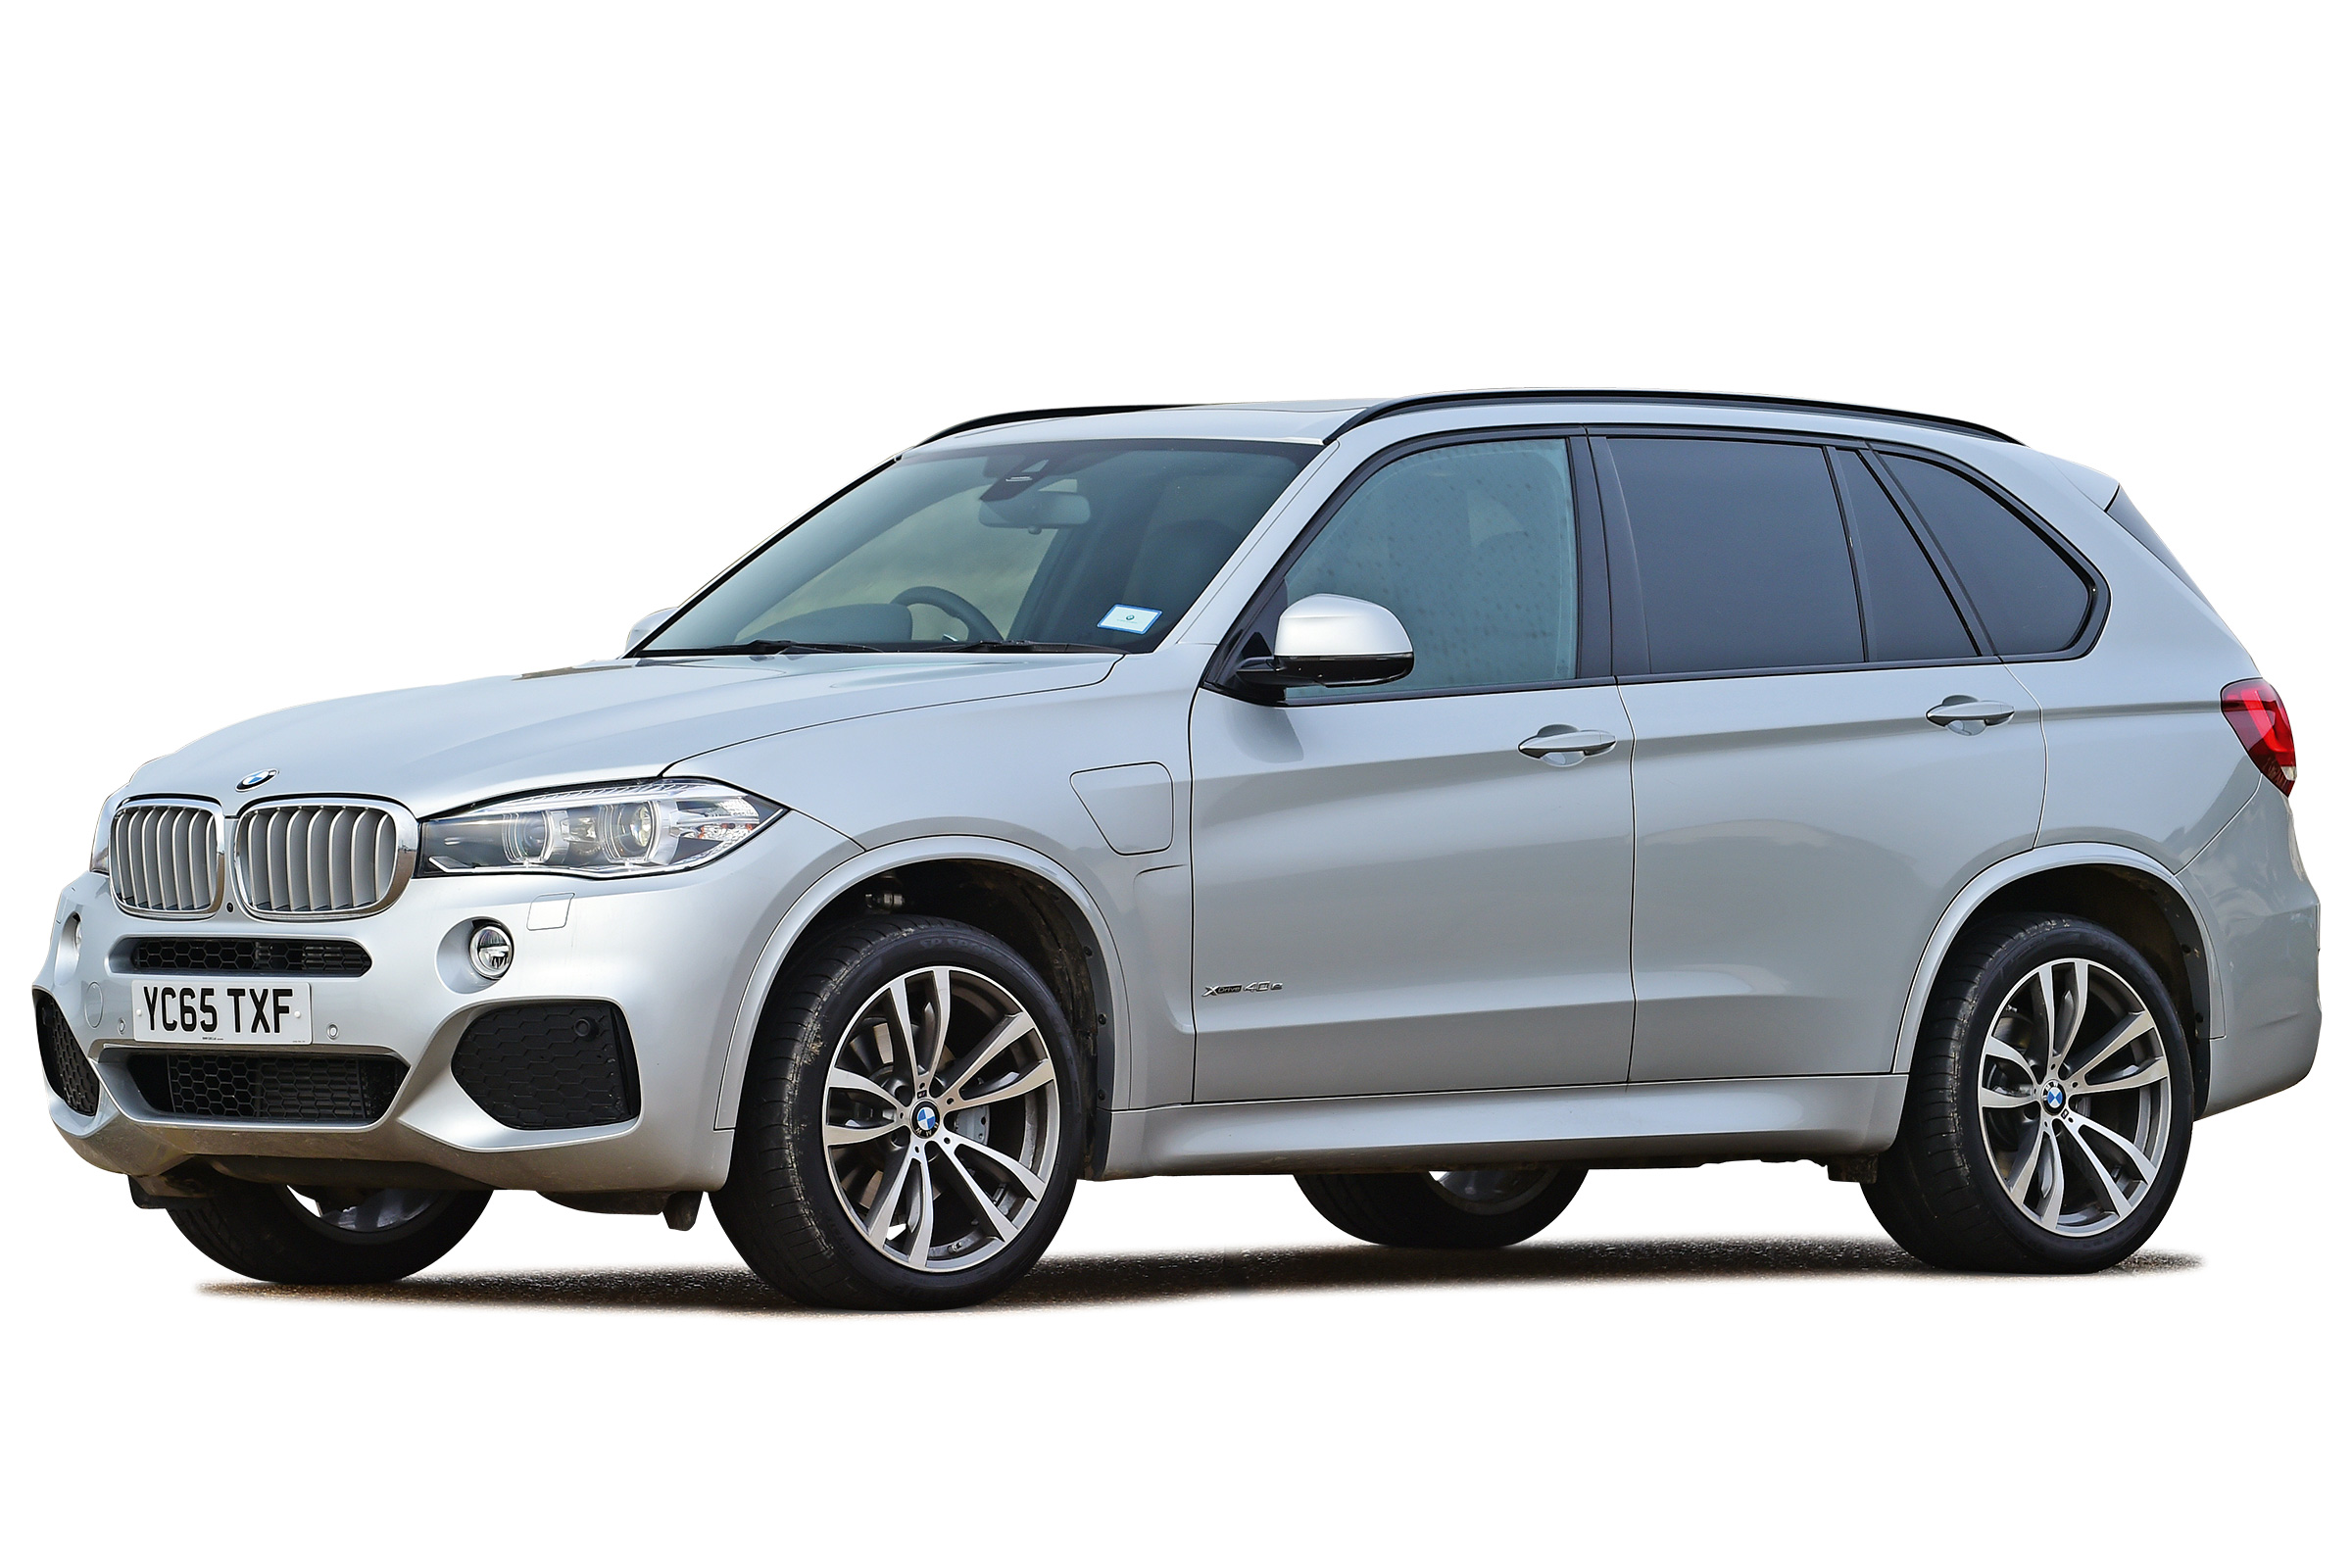 2018 F15 BMW X5 40D M Sport - Condition and Spec Review 